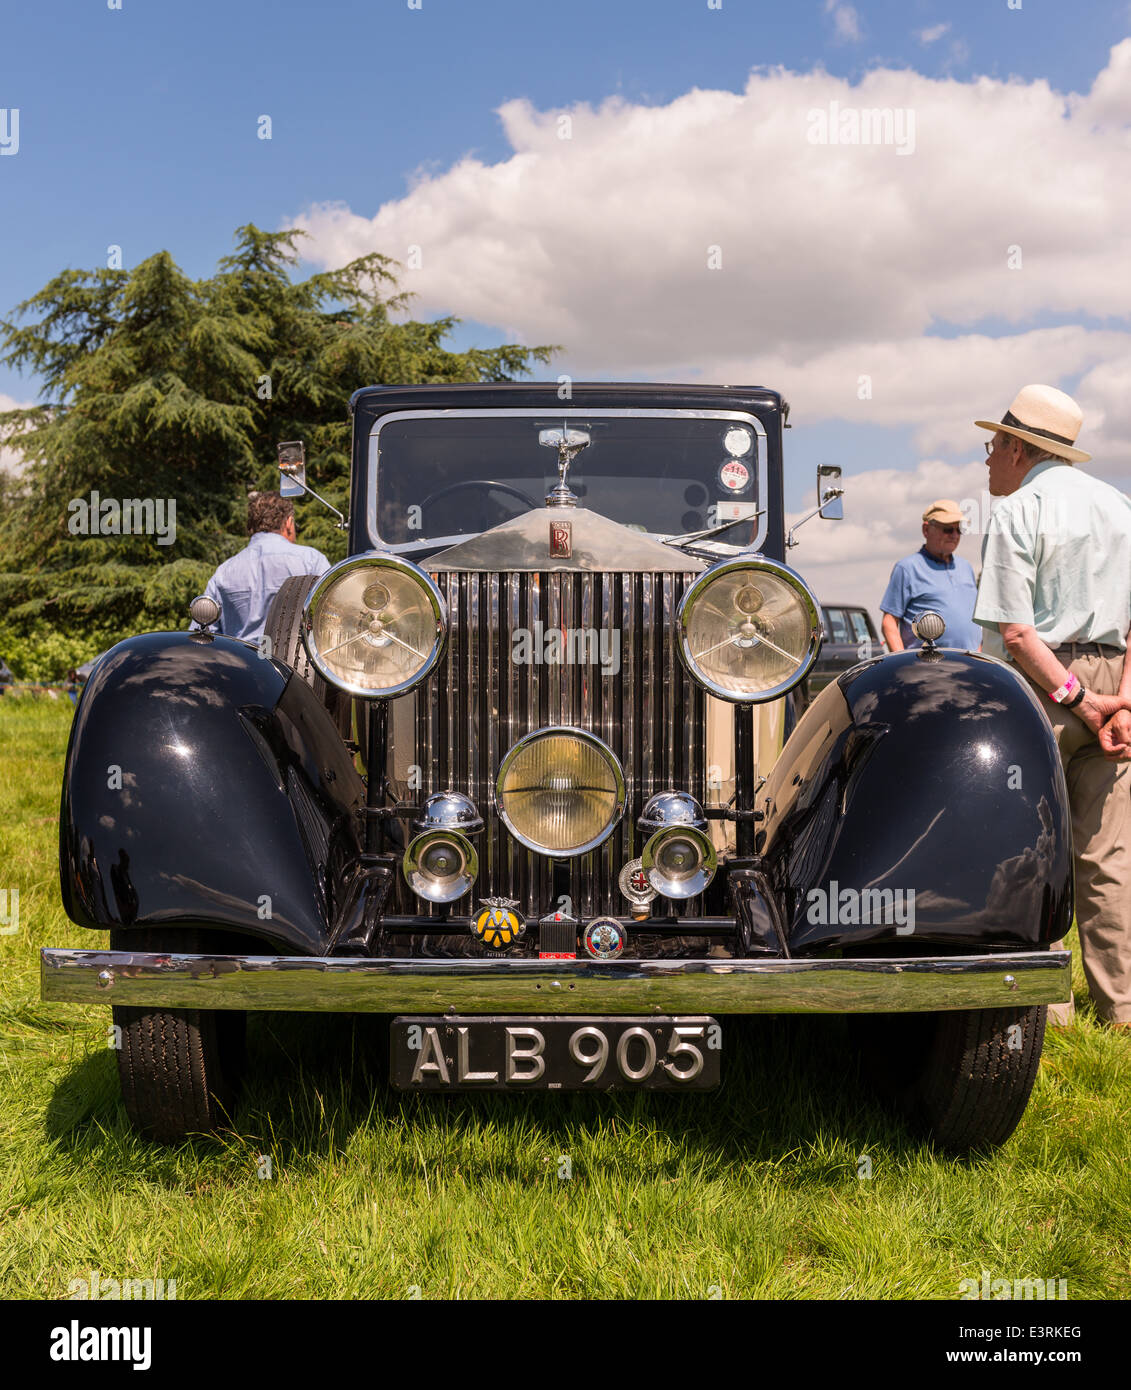 June 21st 2014. East Devon, England. A Fete/Garden Party at a country house in East Devon attracted this 1933 20/25  Rolls Royce Stock Photo